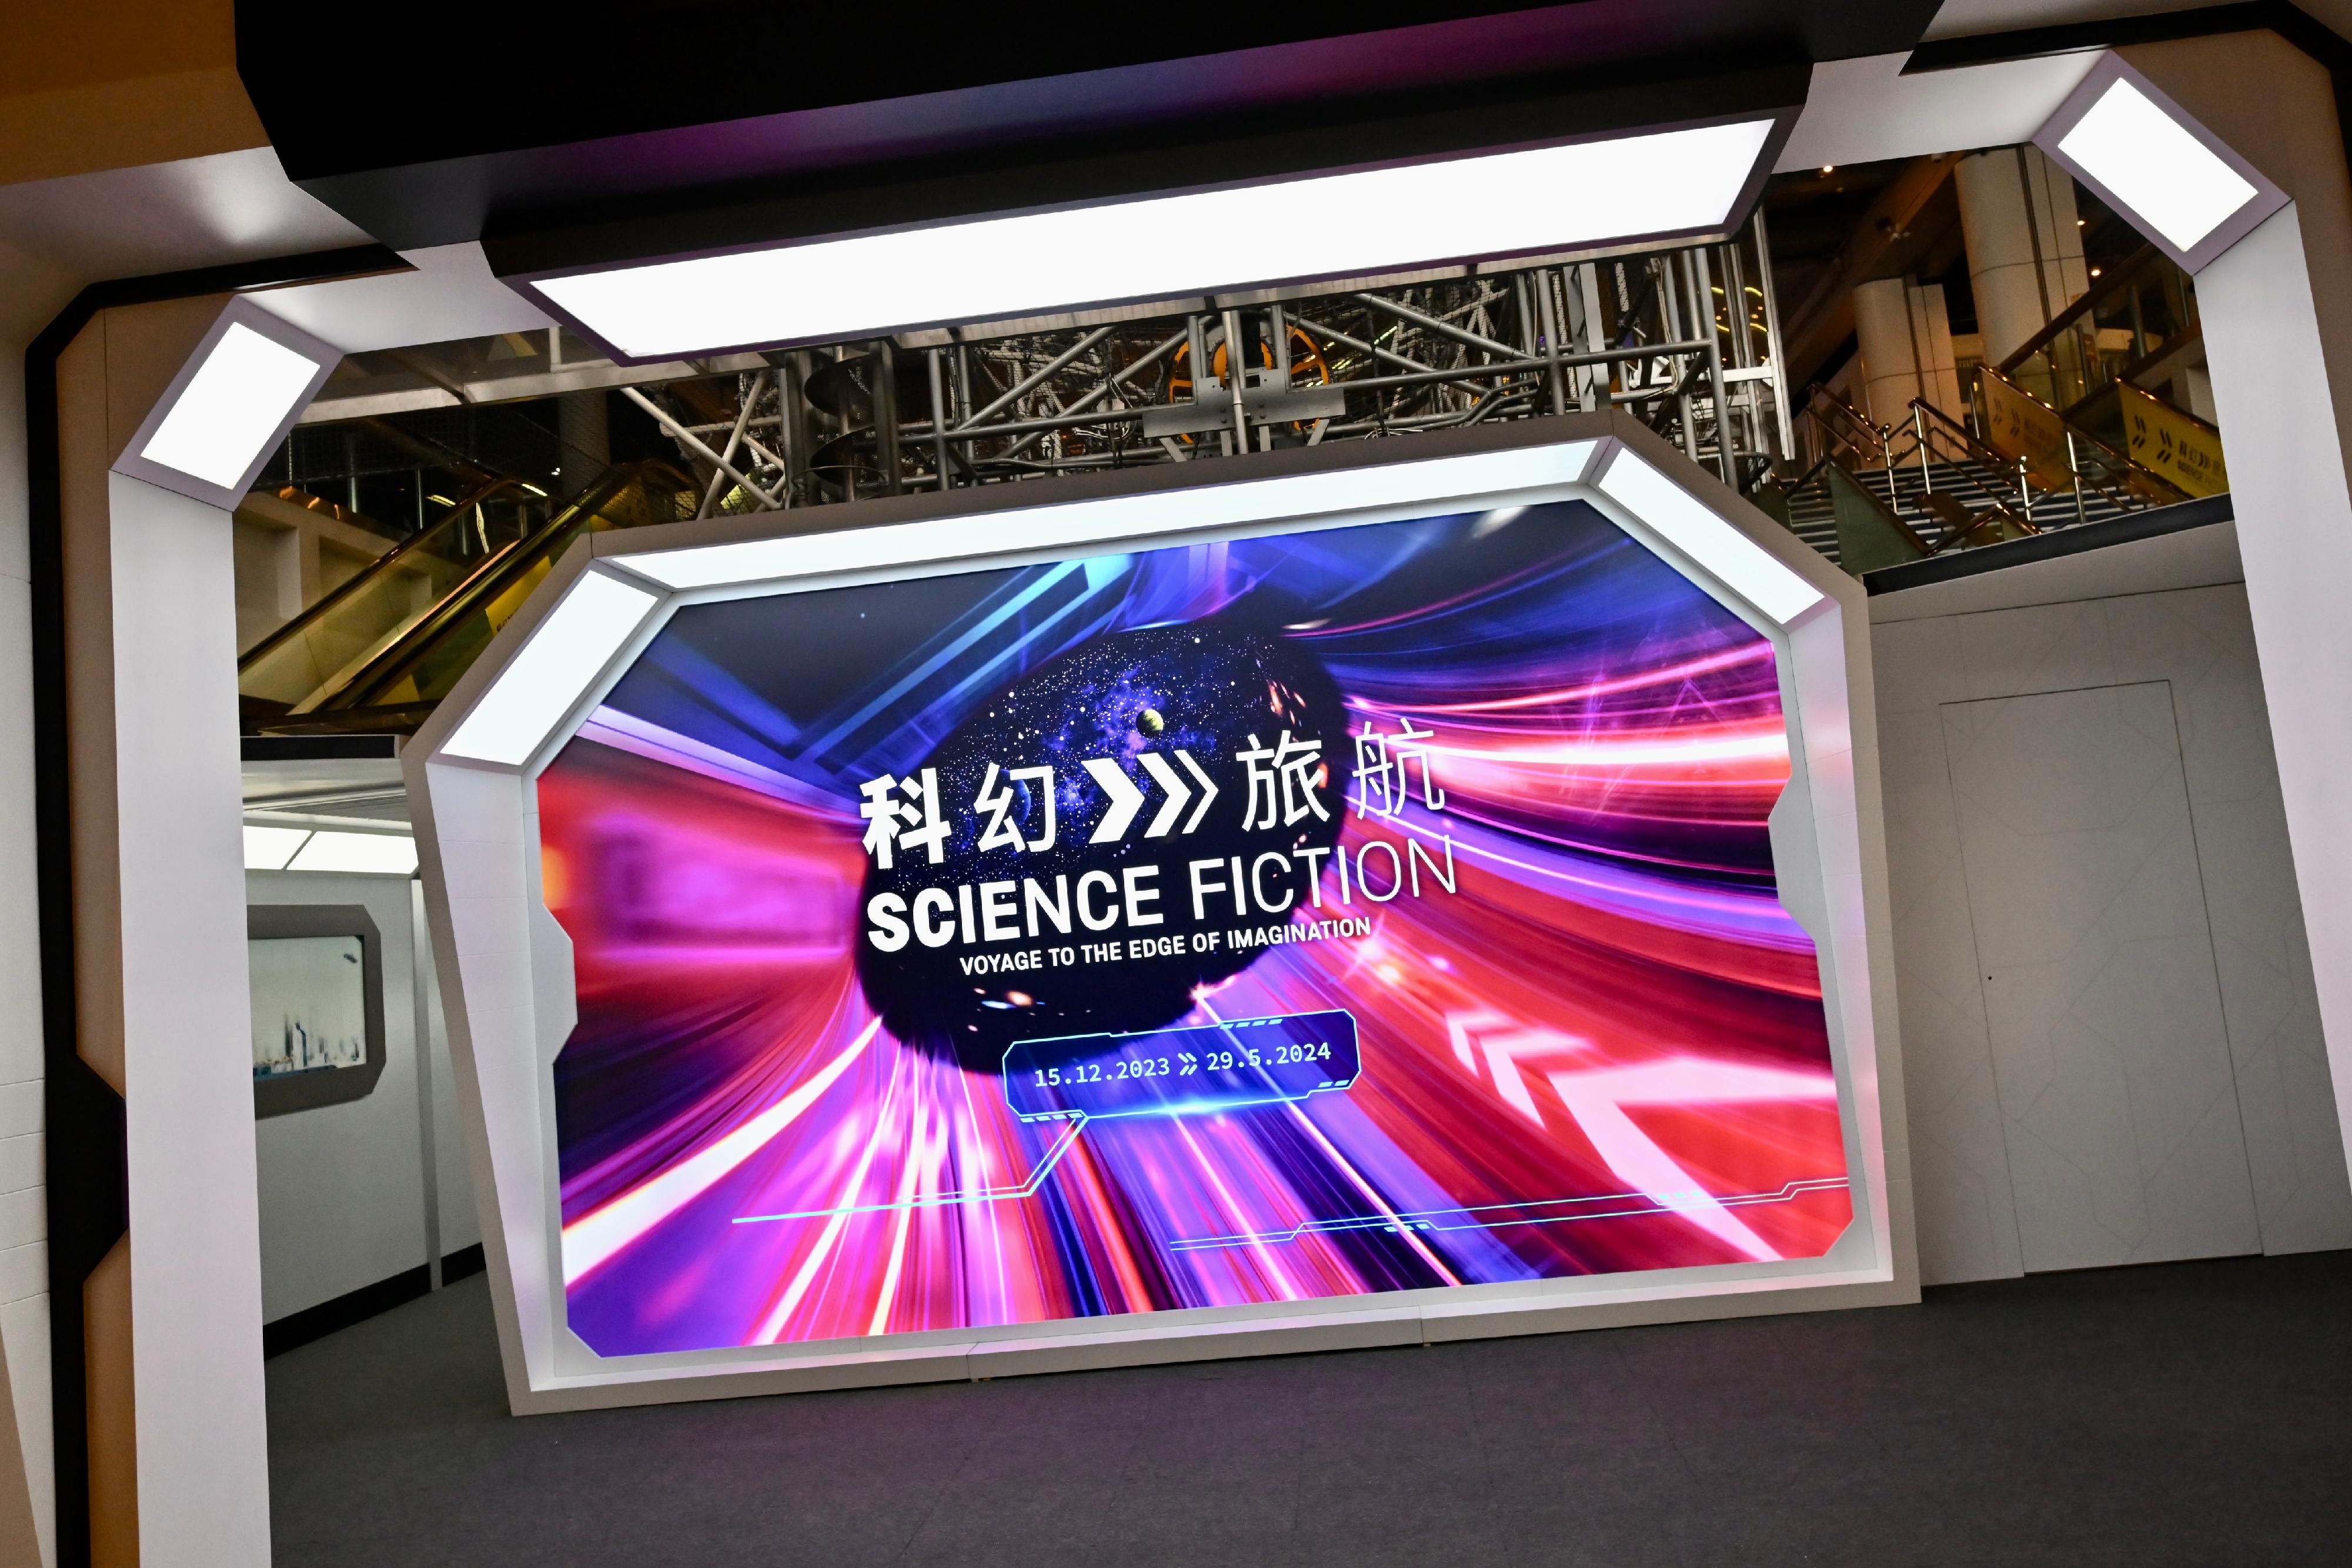 The Hong Kong Science Museum will launch a new special exhibition, "Science Fiction: Voyage to the Edge of Imagination", tomorrow (December 15). Visitors may feel as if they have entered an interactive science fiction story which takes them beyond classical space travel to different themes of science fiction.